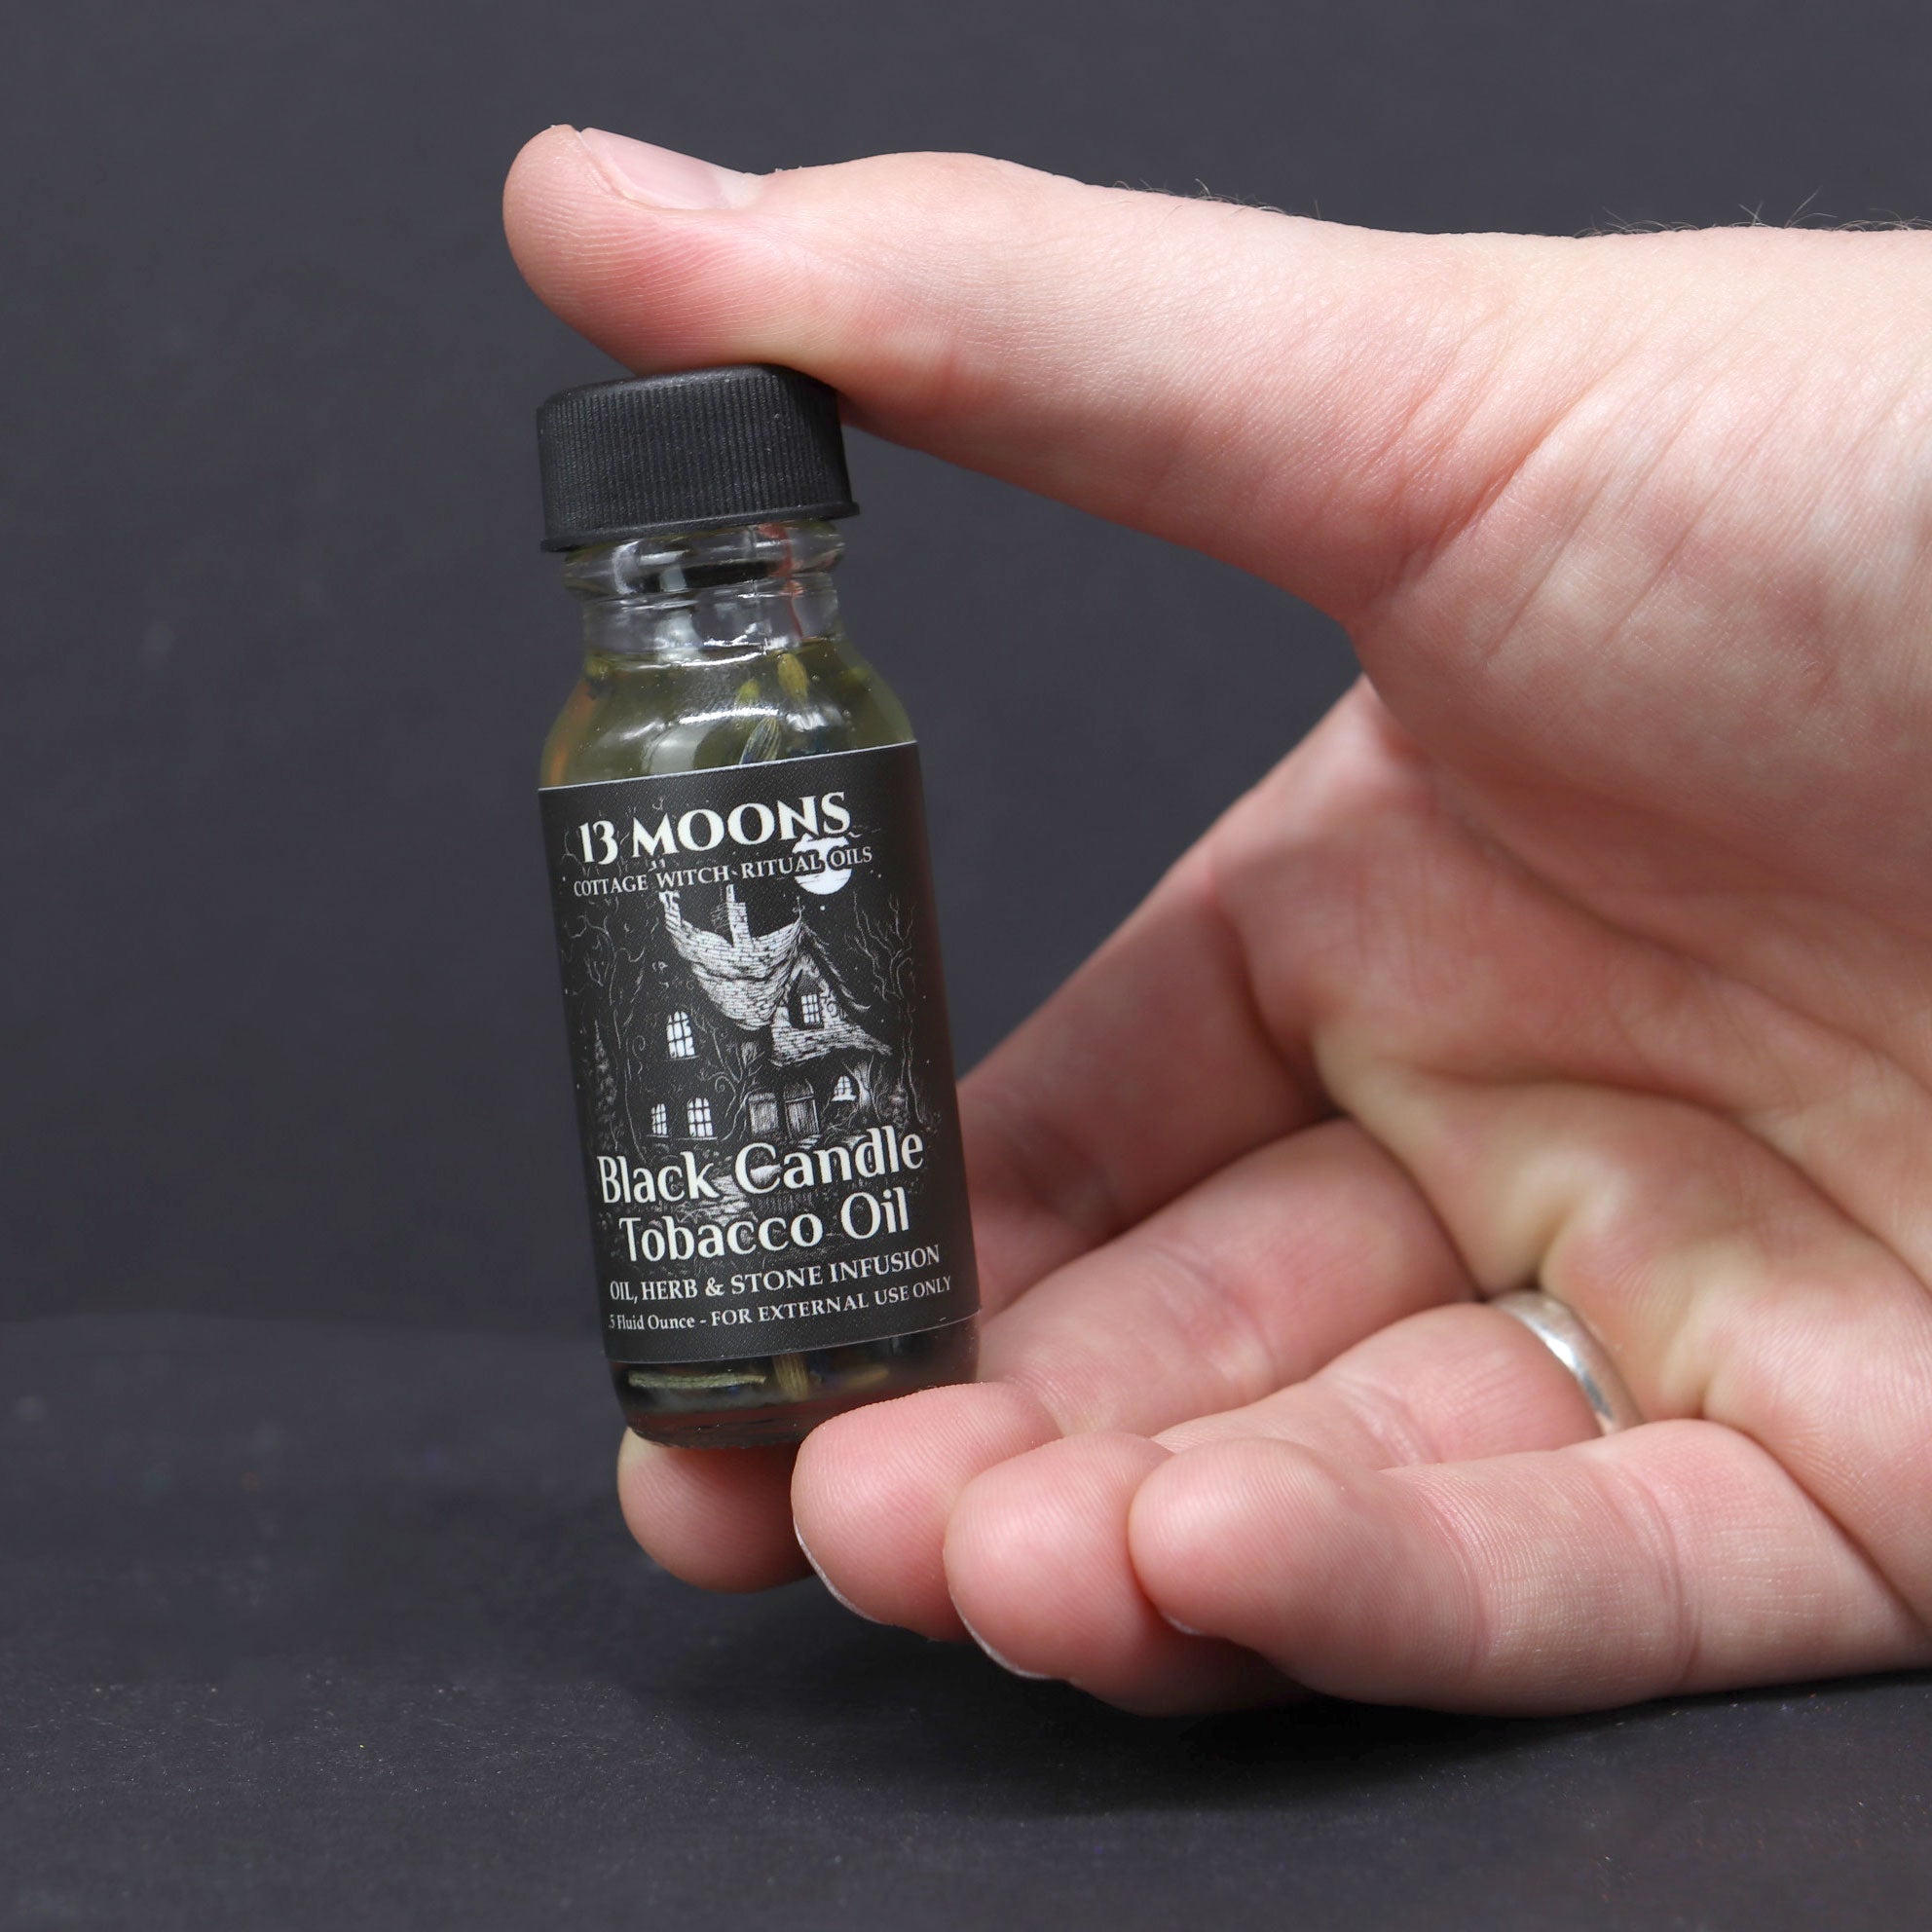 Black Candle Tobacco Ritual Oil by 13 Moons - 13 Moons